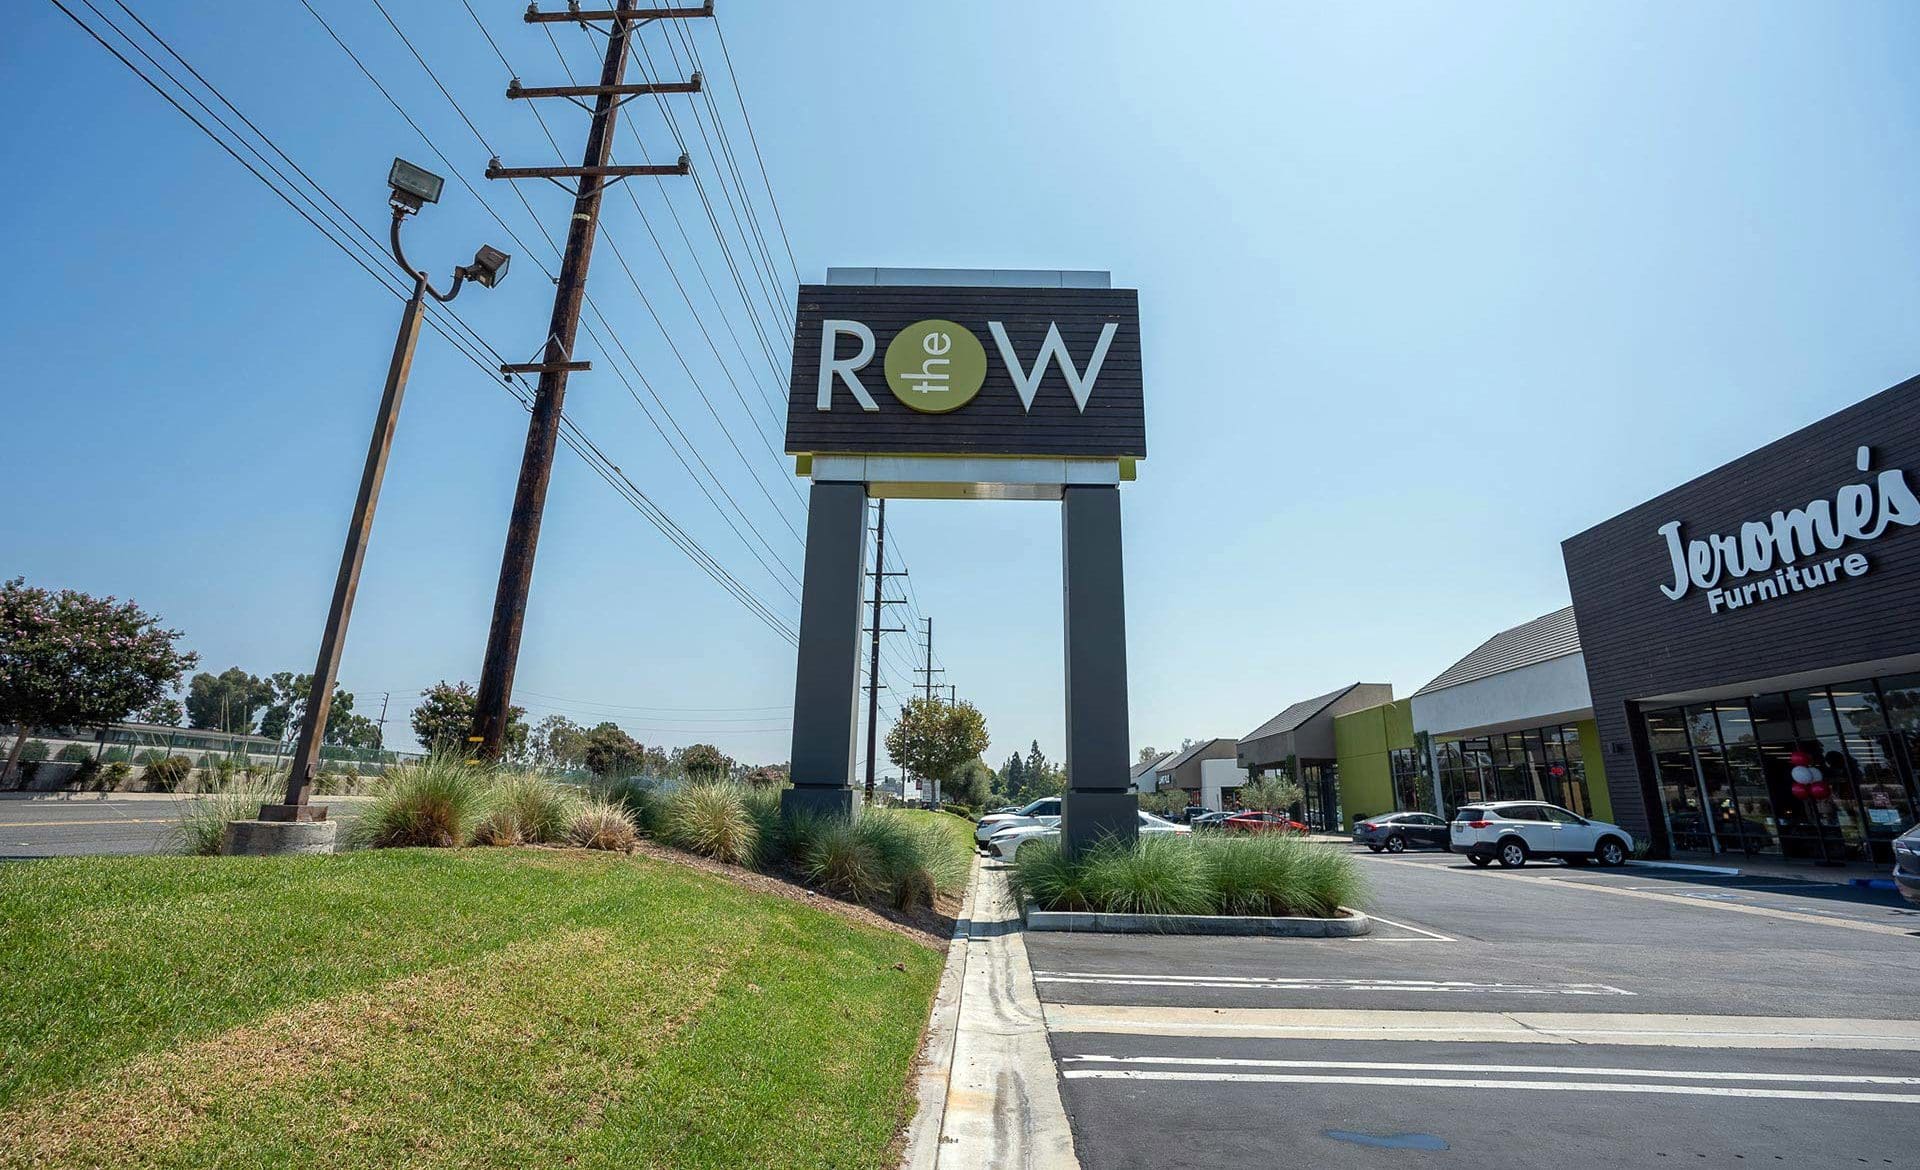 The Row logo large exterior road sign